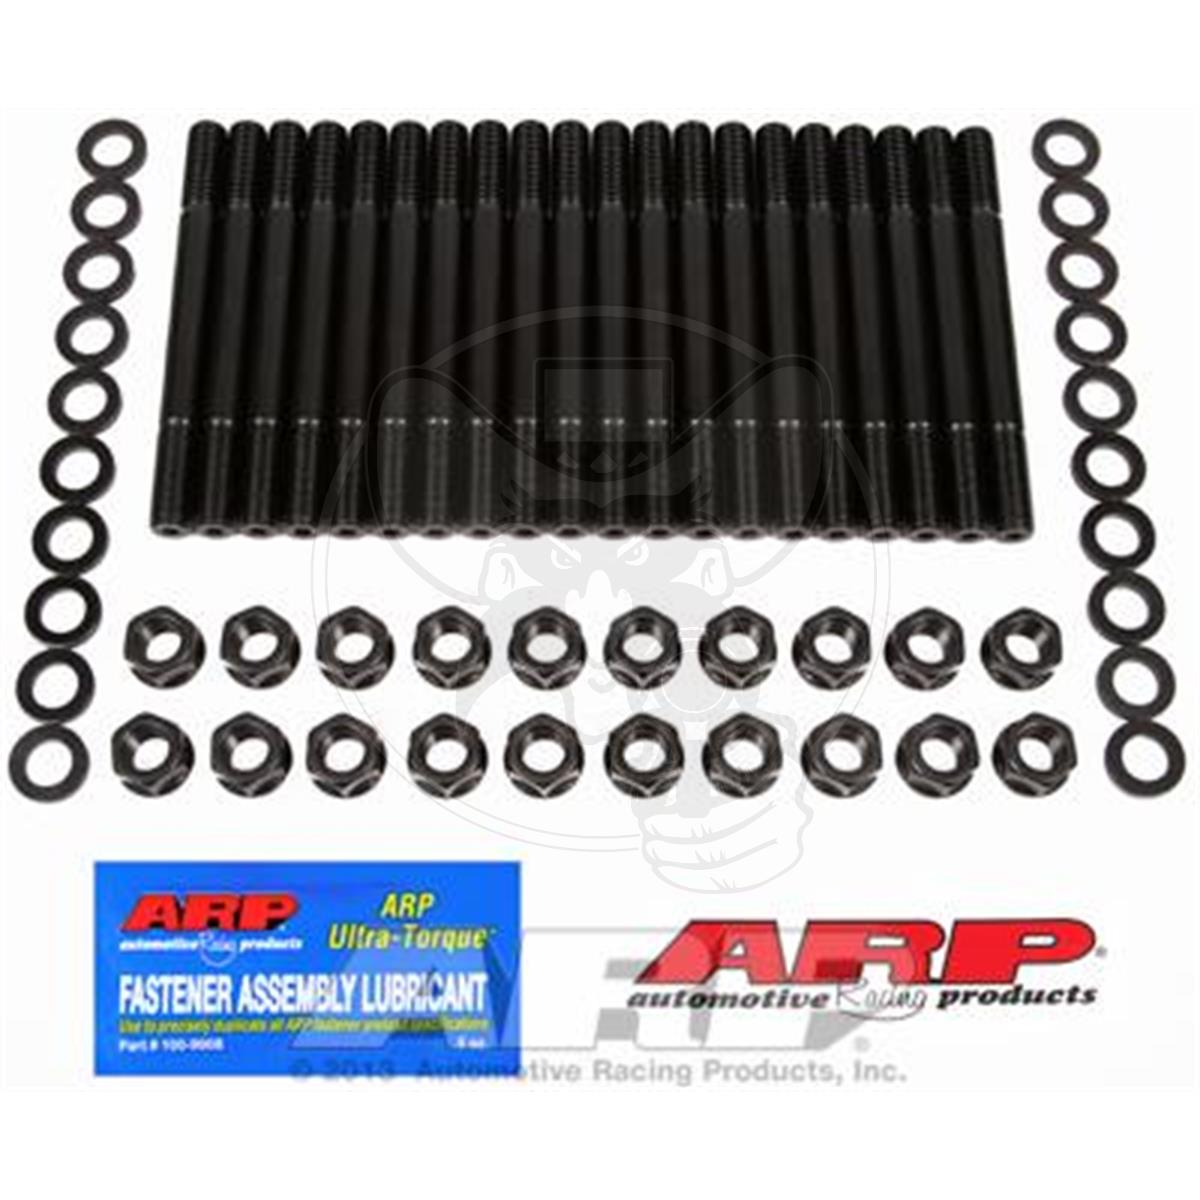 ARP CYLINDER HEAD STUD KIT FITS FORD CLEVELAND 302/351/400 HEX NUTS